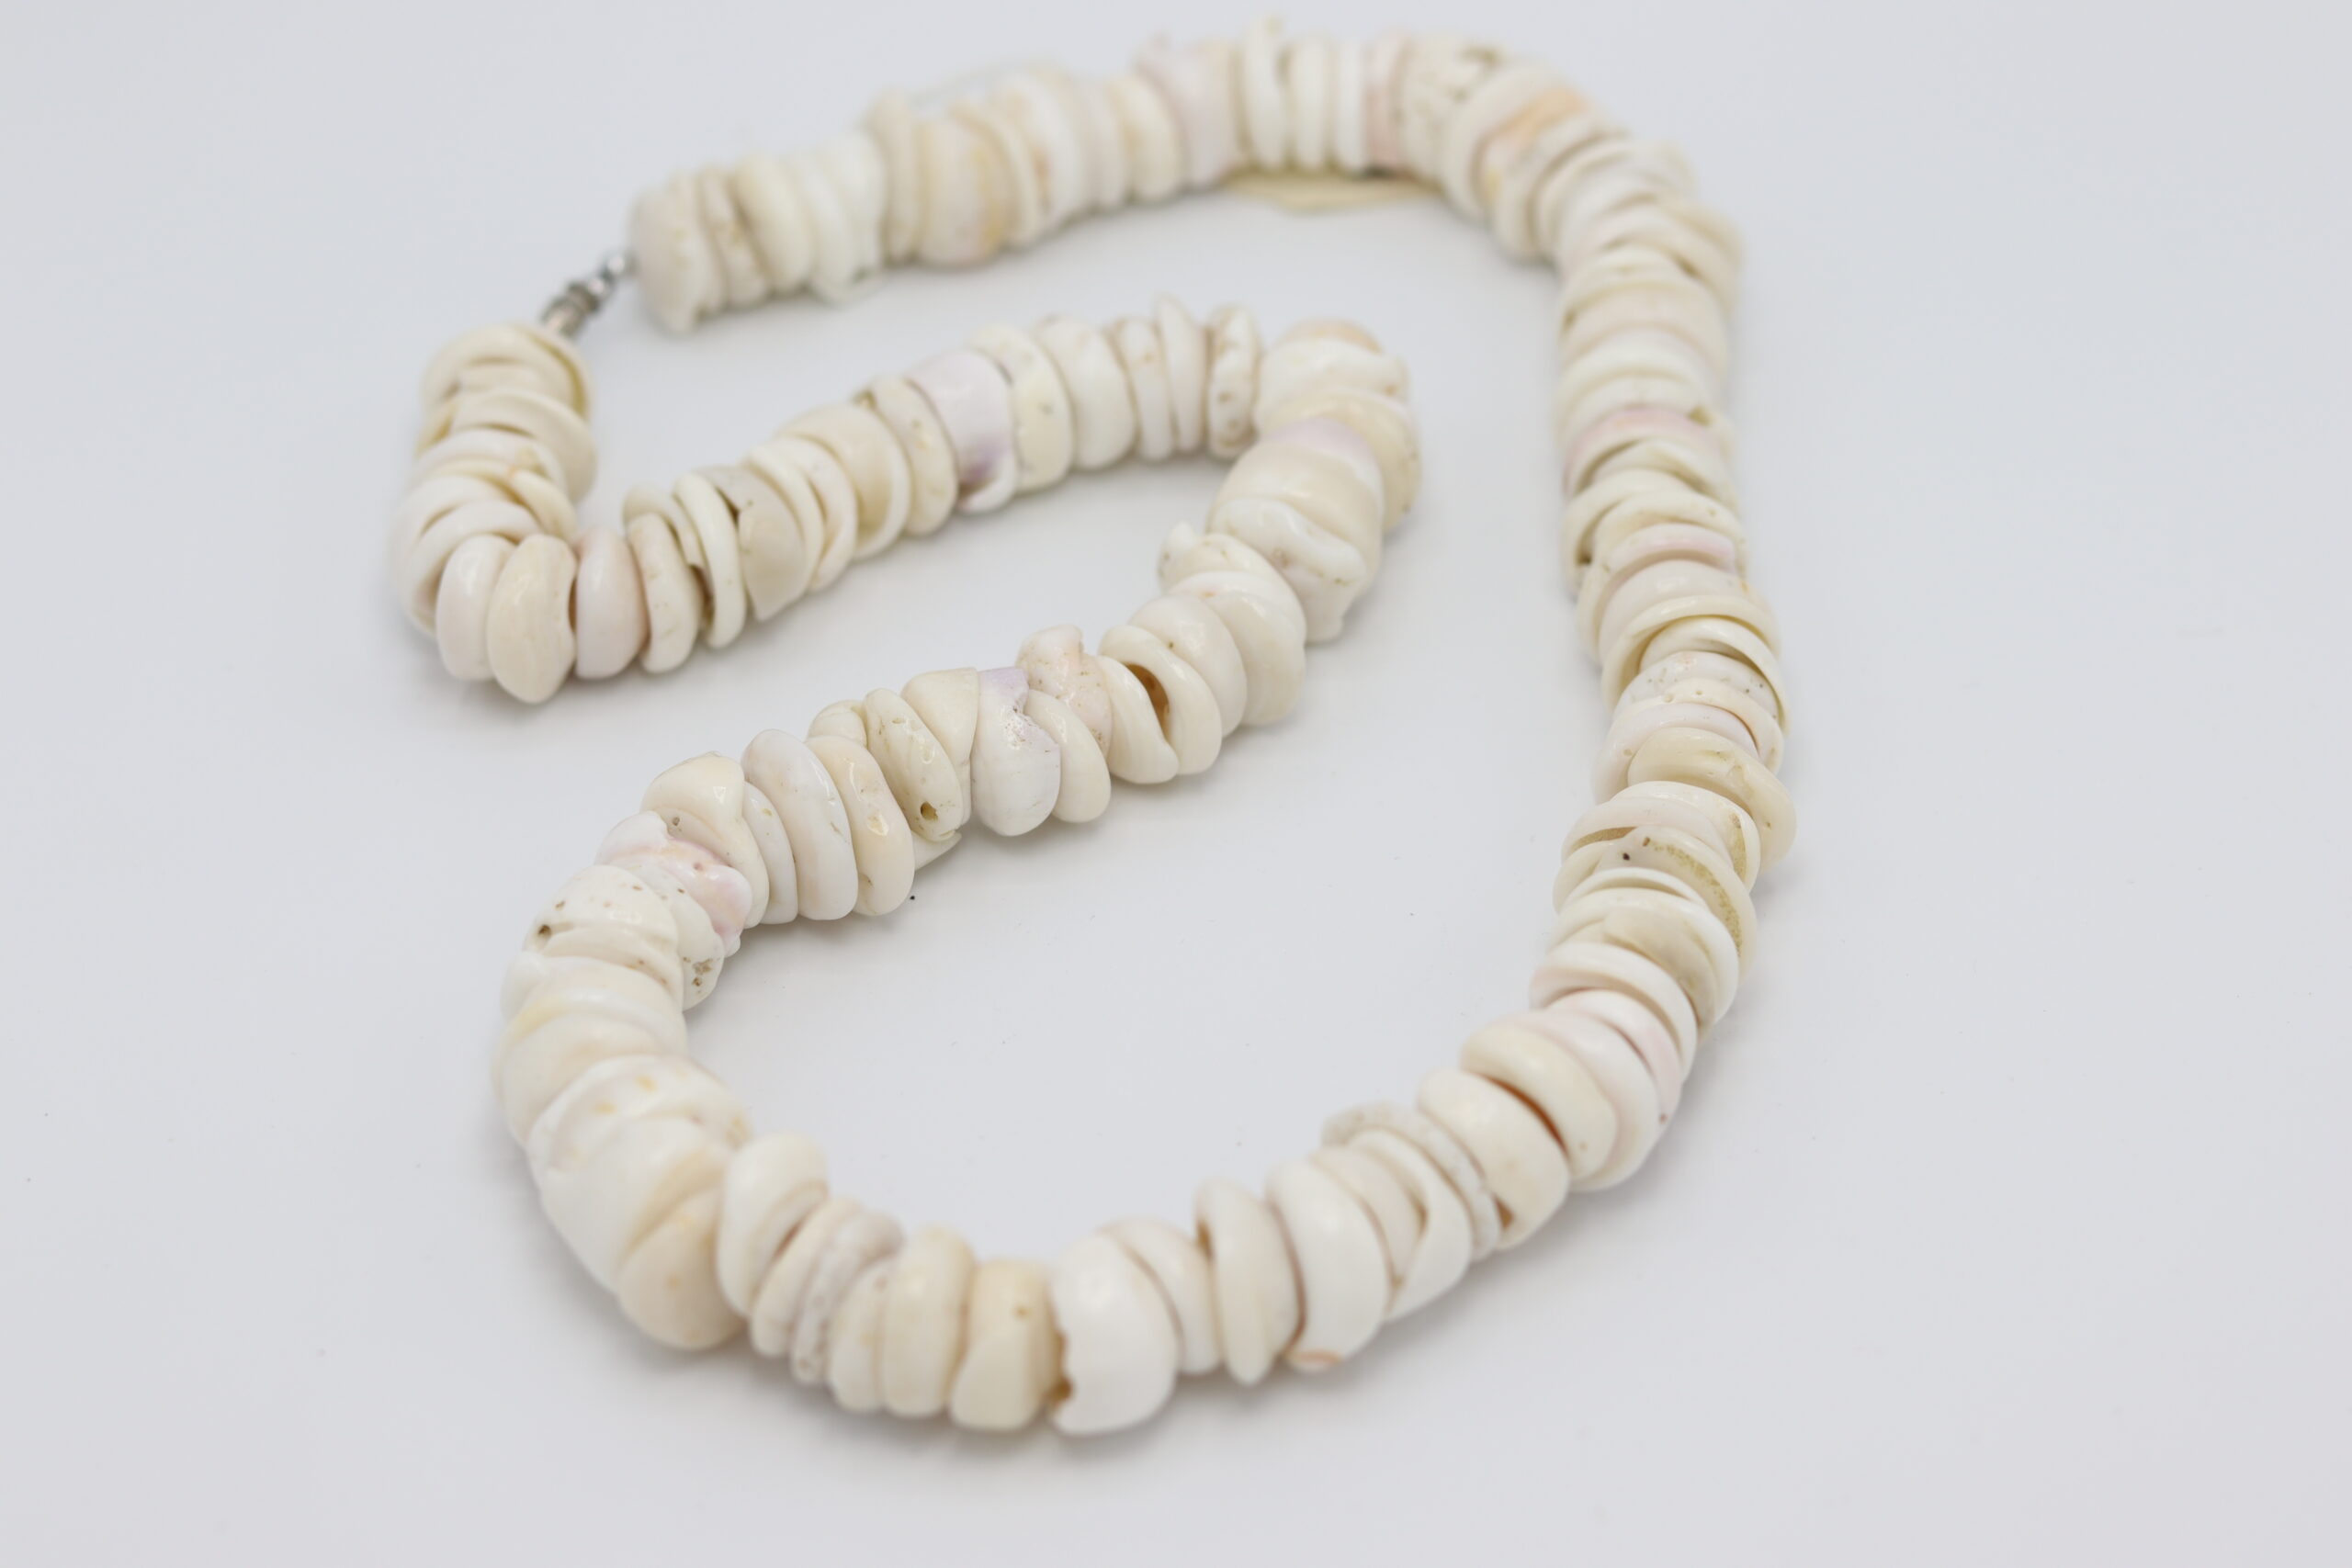 Buy Vintage Shell Necklace, 16 Puka Shell Necklace, Surfer Necklace, Beaded  Necklace, Vintage Shell Online in India - Etsy